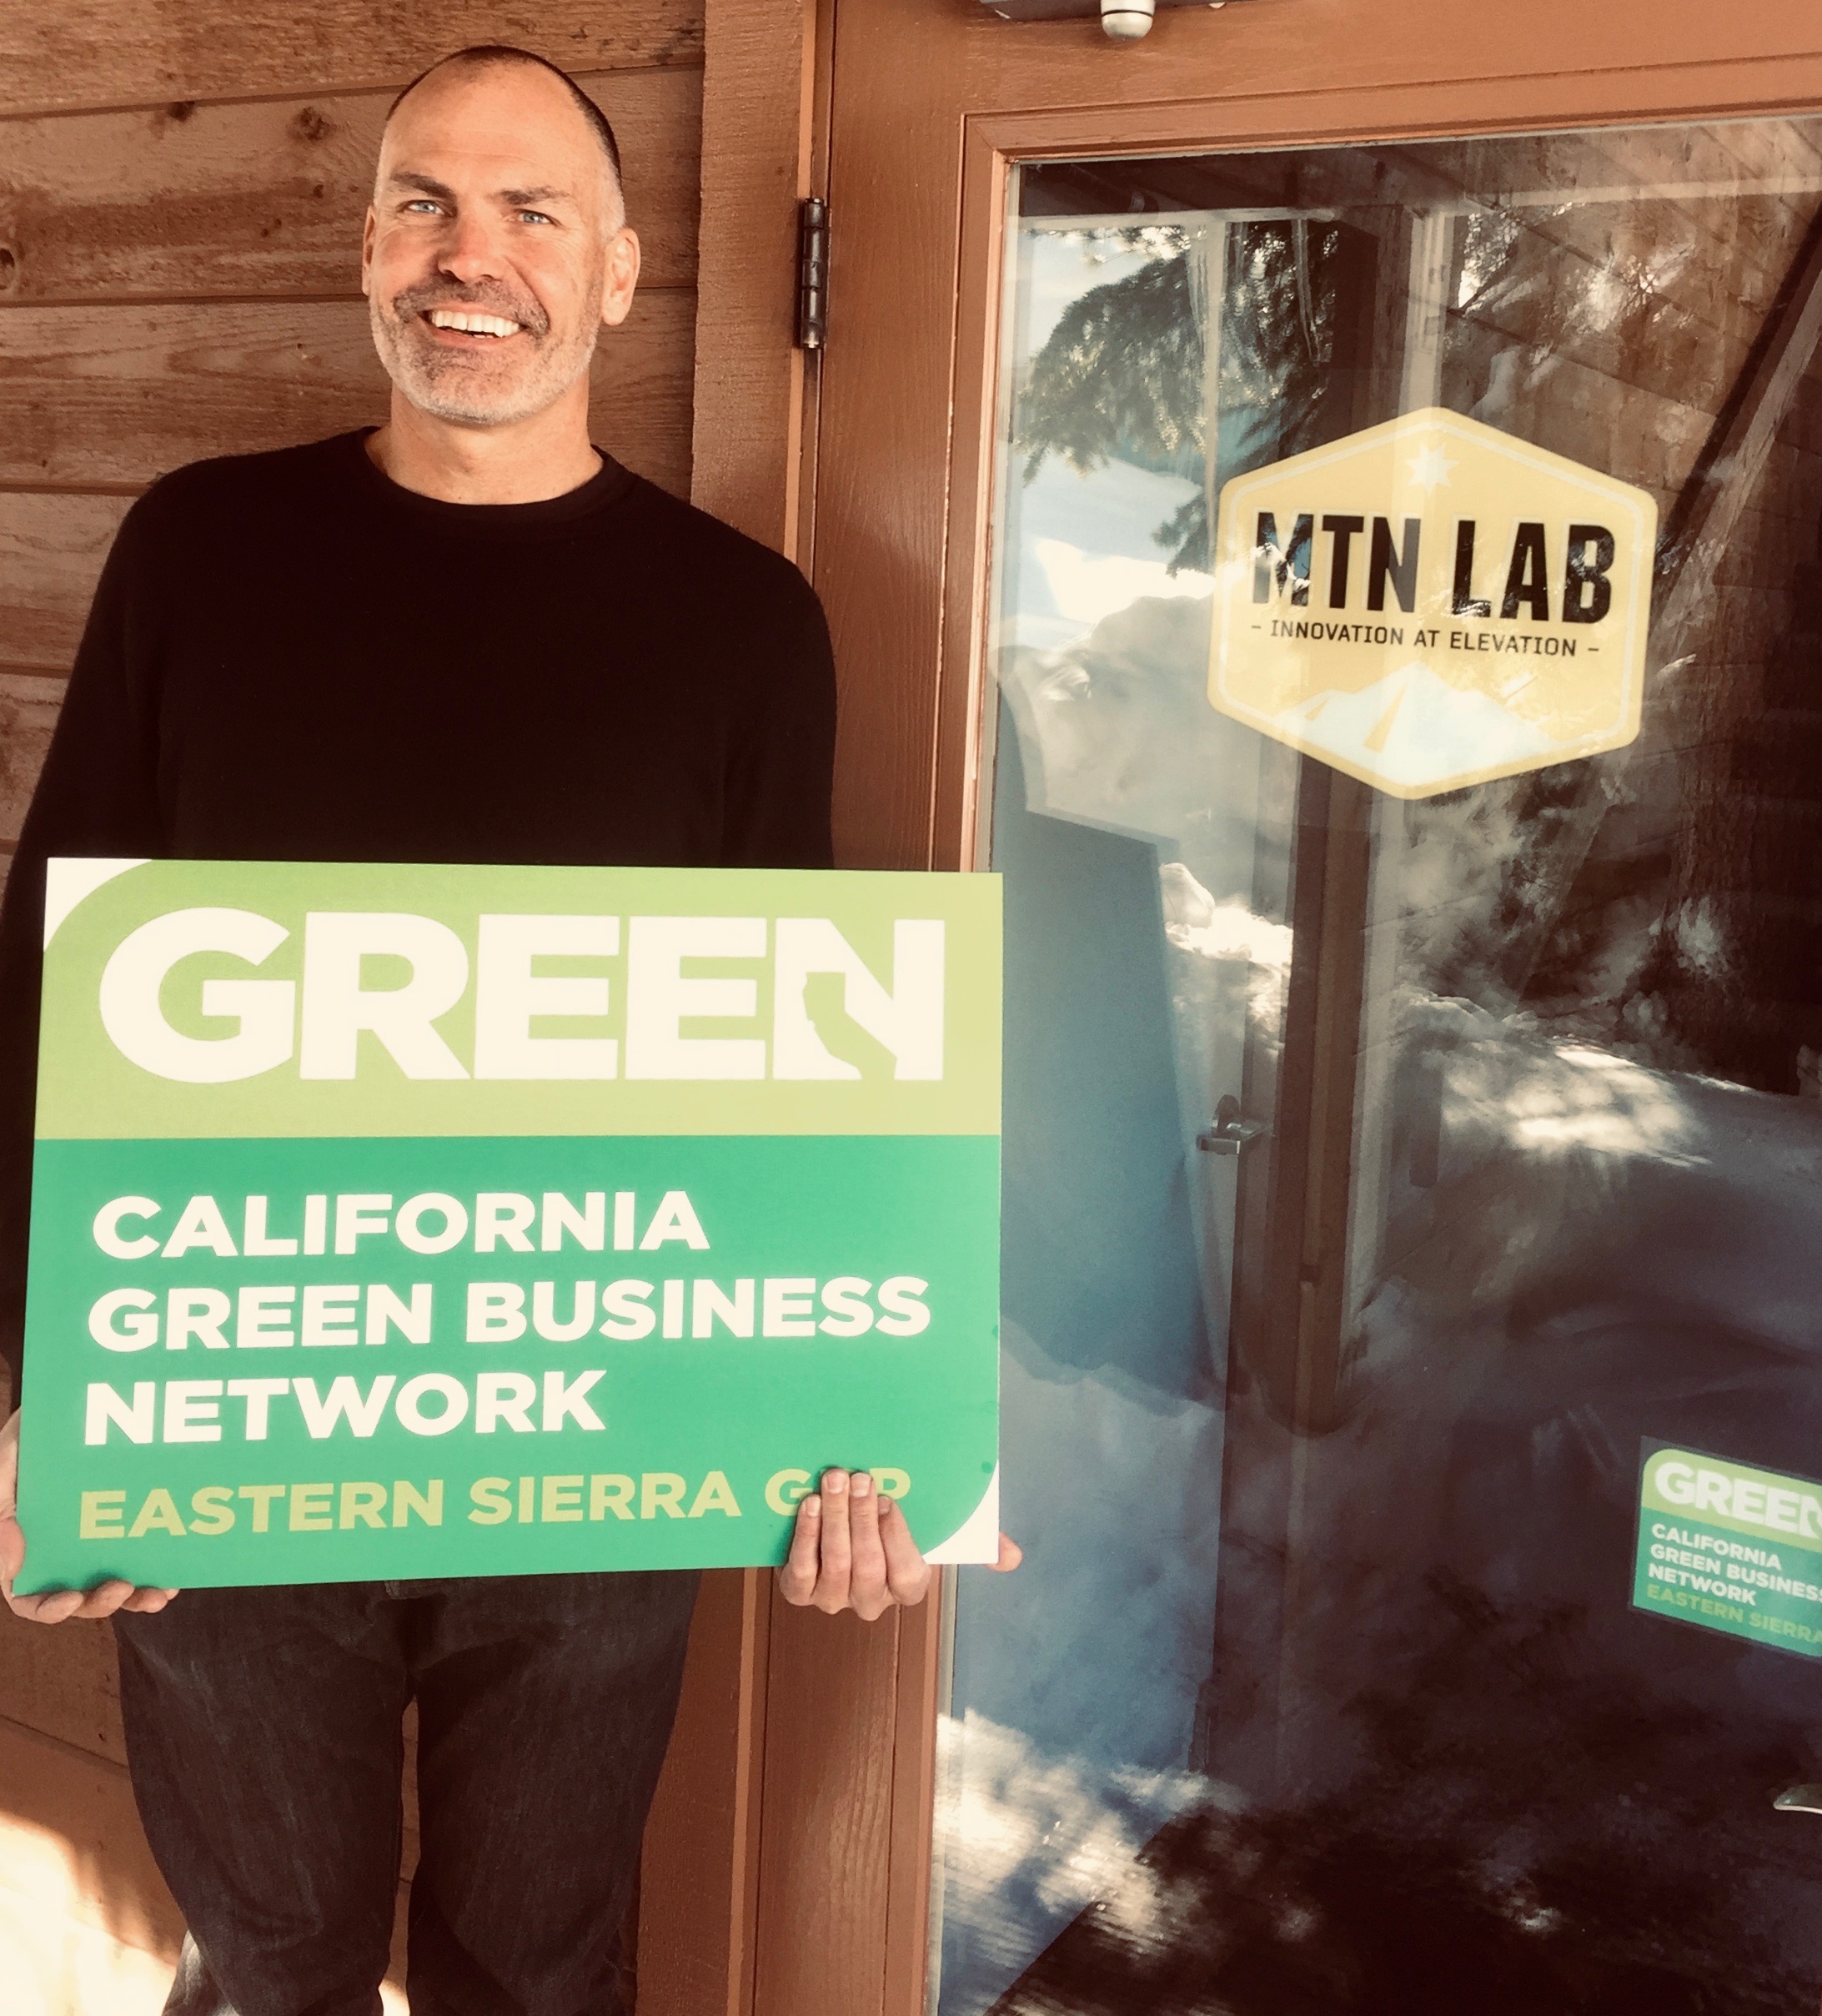 Newest Certified Green Business: The Mountain Lab